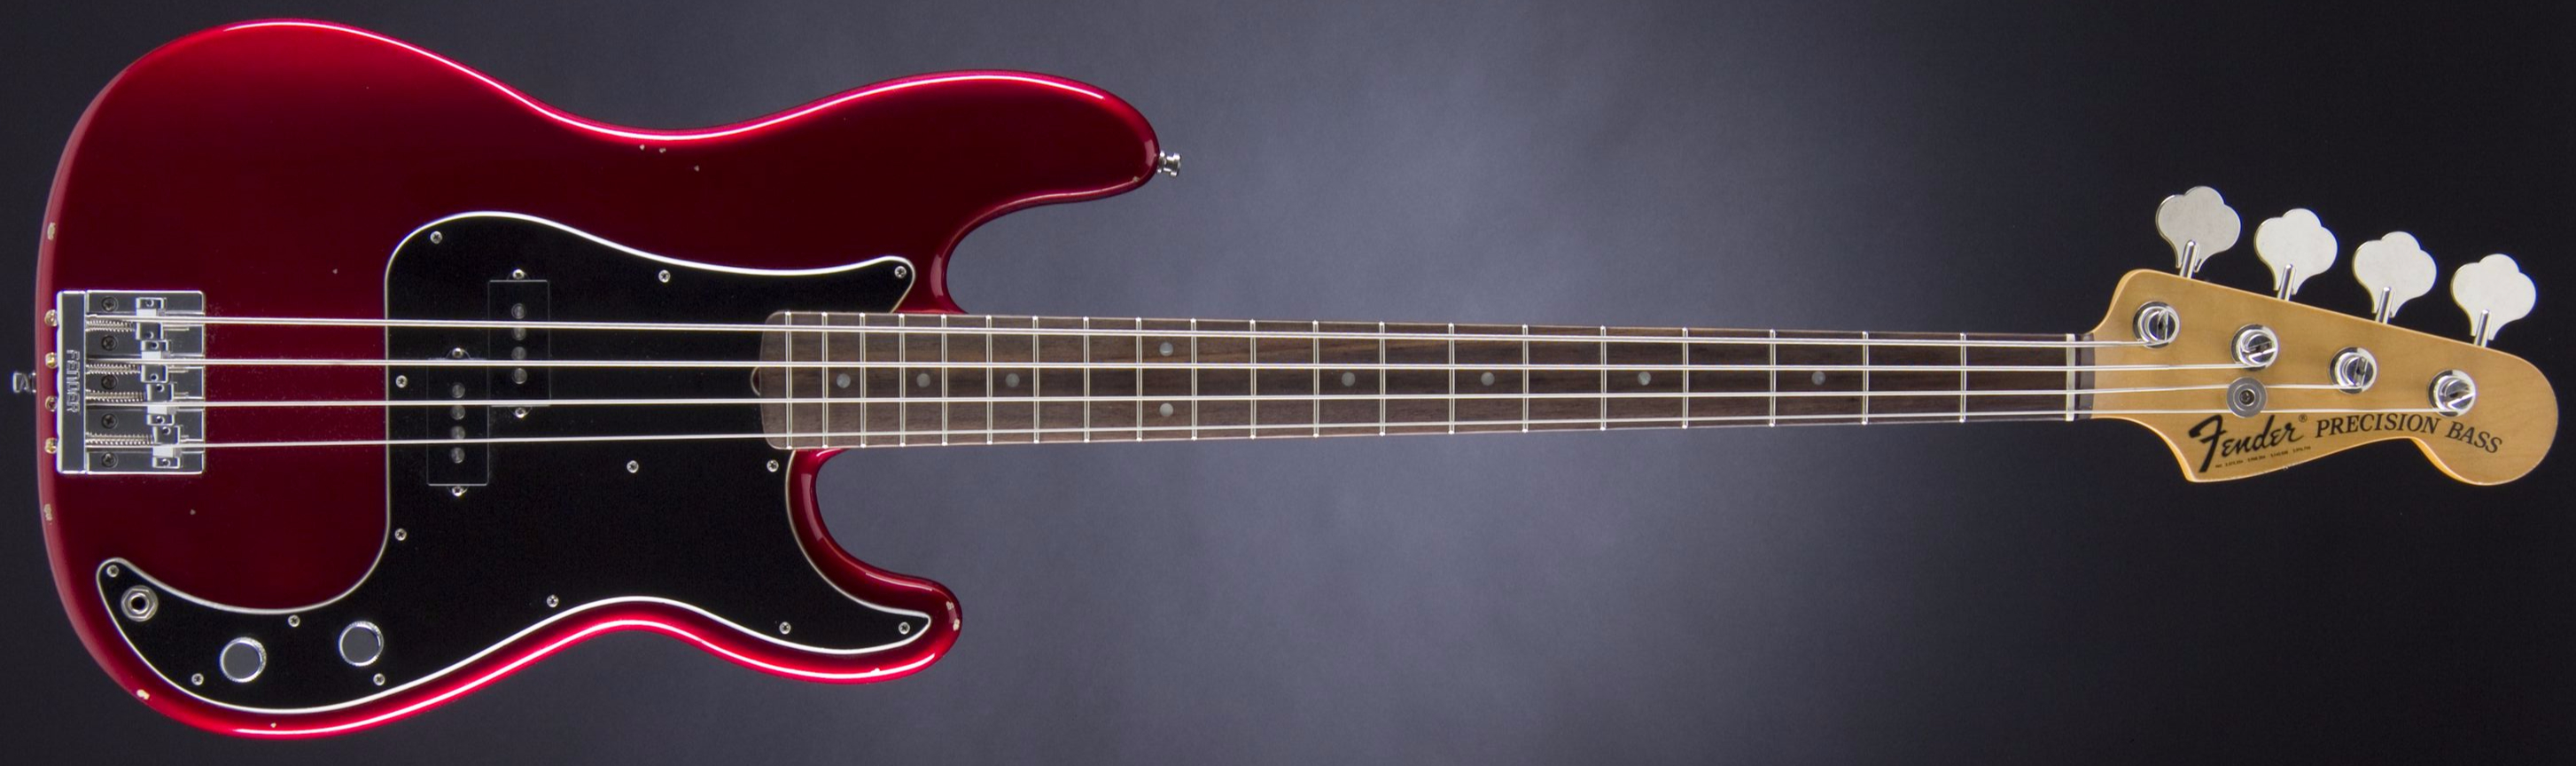 Fender Nate Mendel Precision Bass Candy Apple Red | MUSIC STORE professional